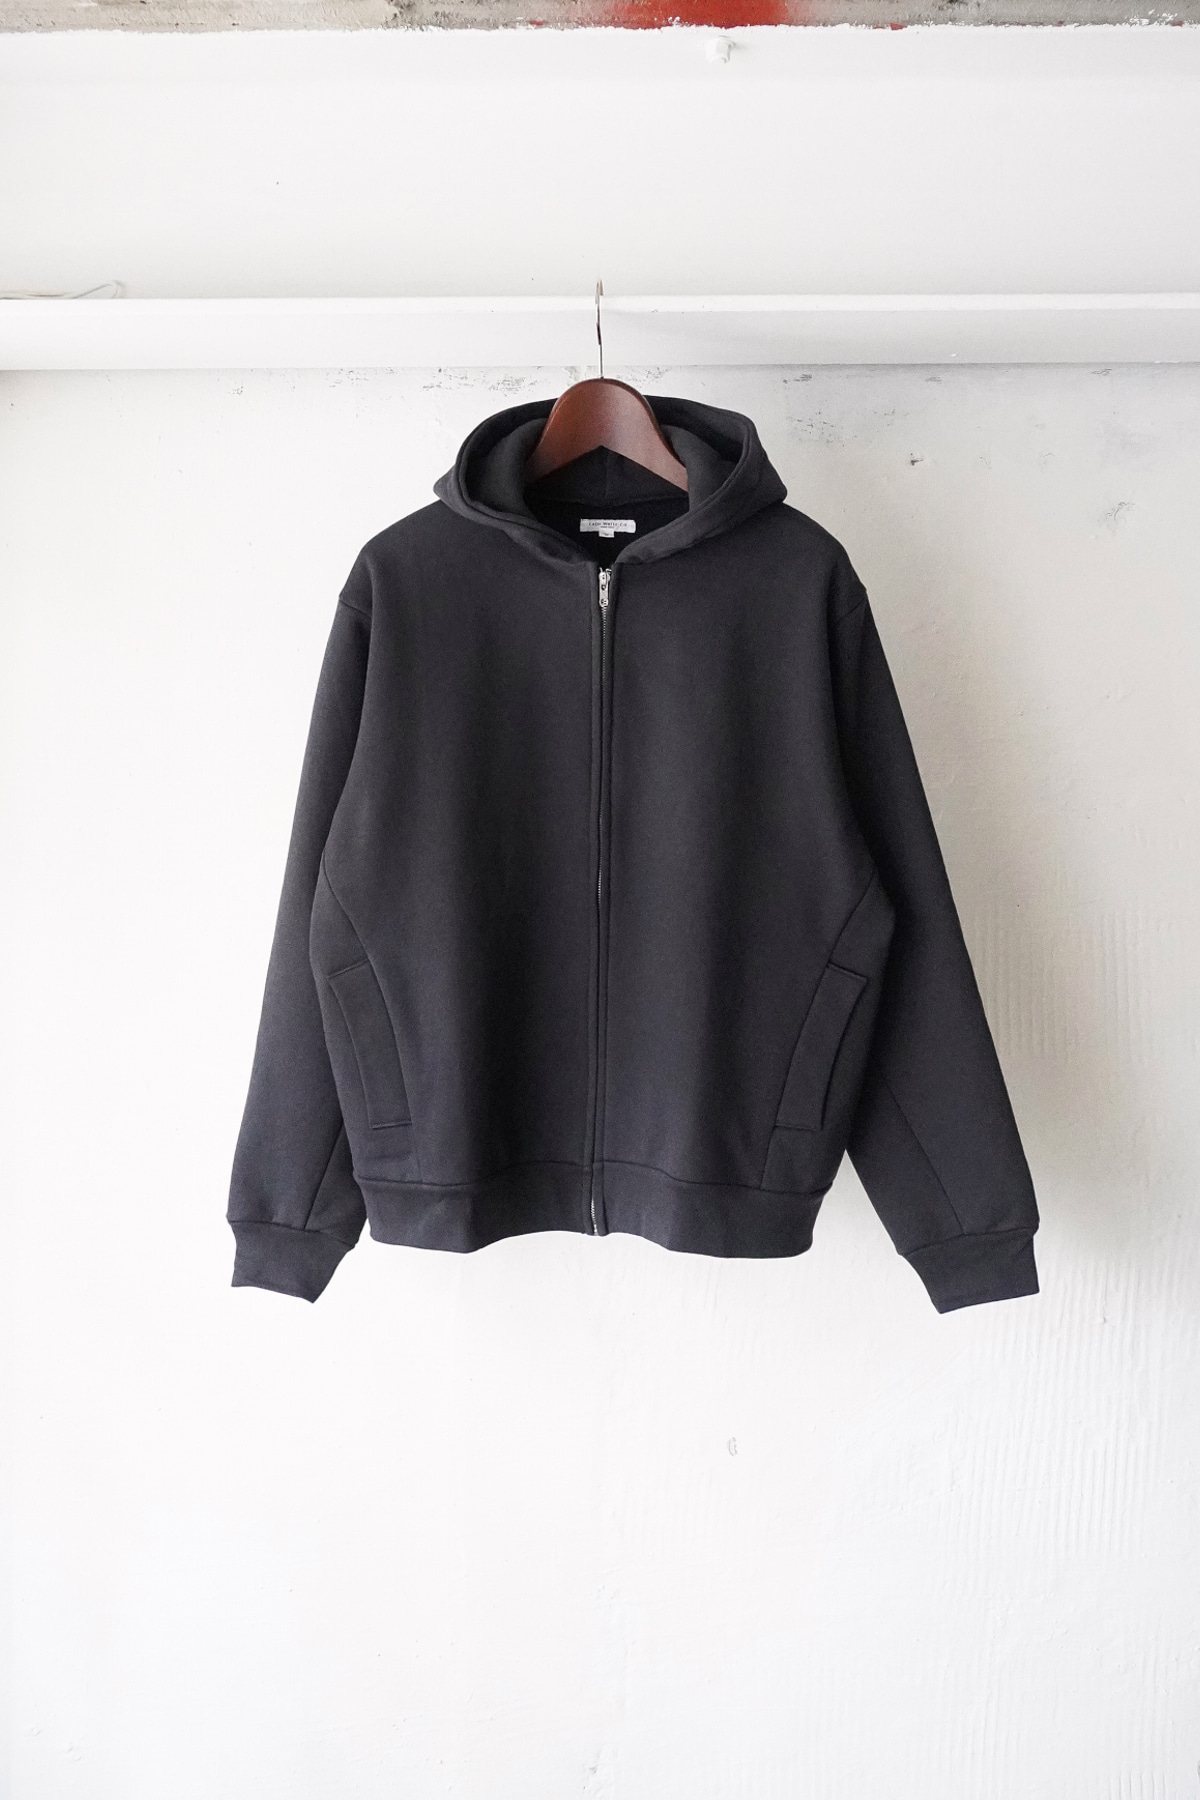 lady white co. heavy zip up charcoal